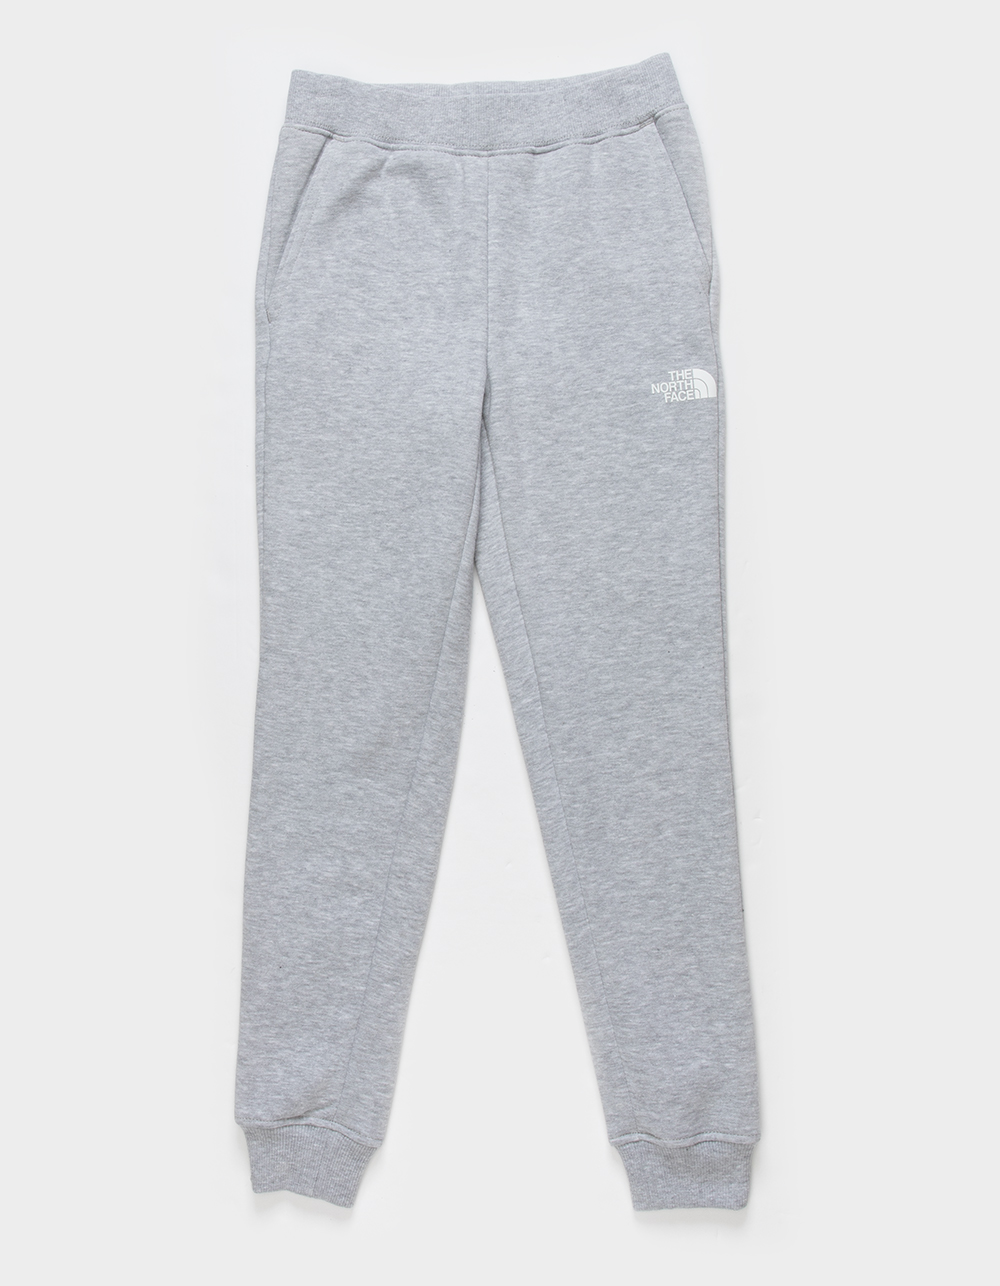 THE NORTH FACE Camp Girls Fleece Joggers - HEATHER GRAY | Tillys